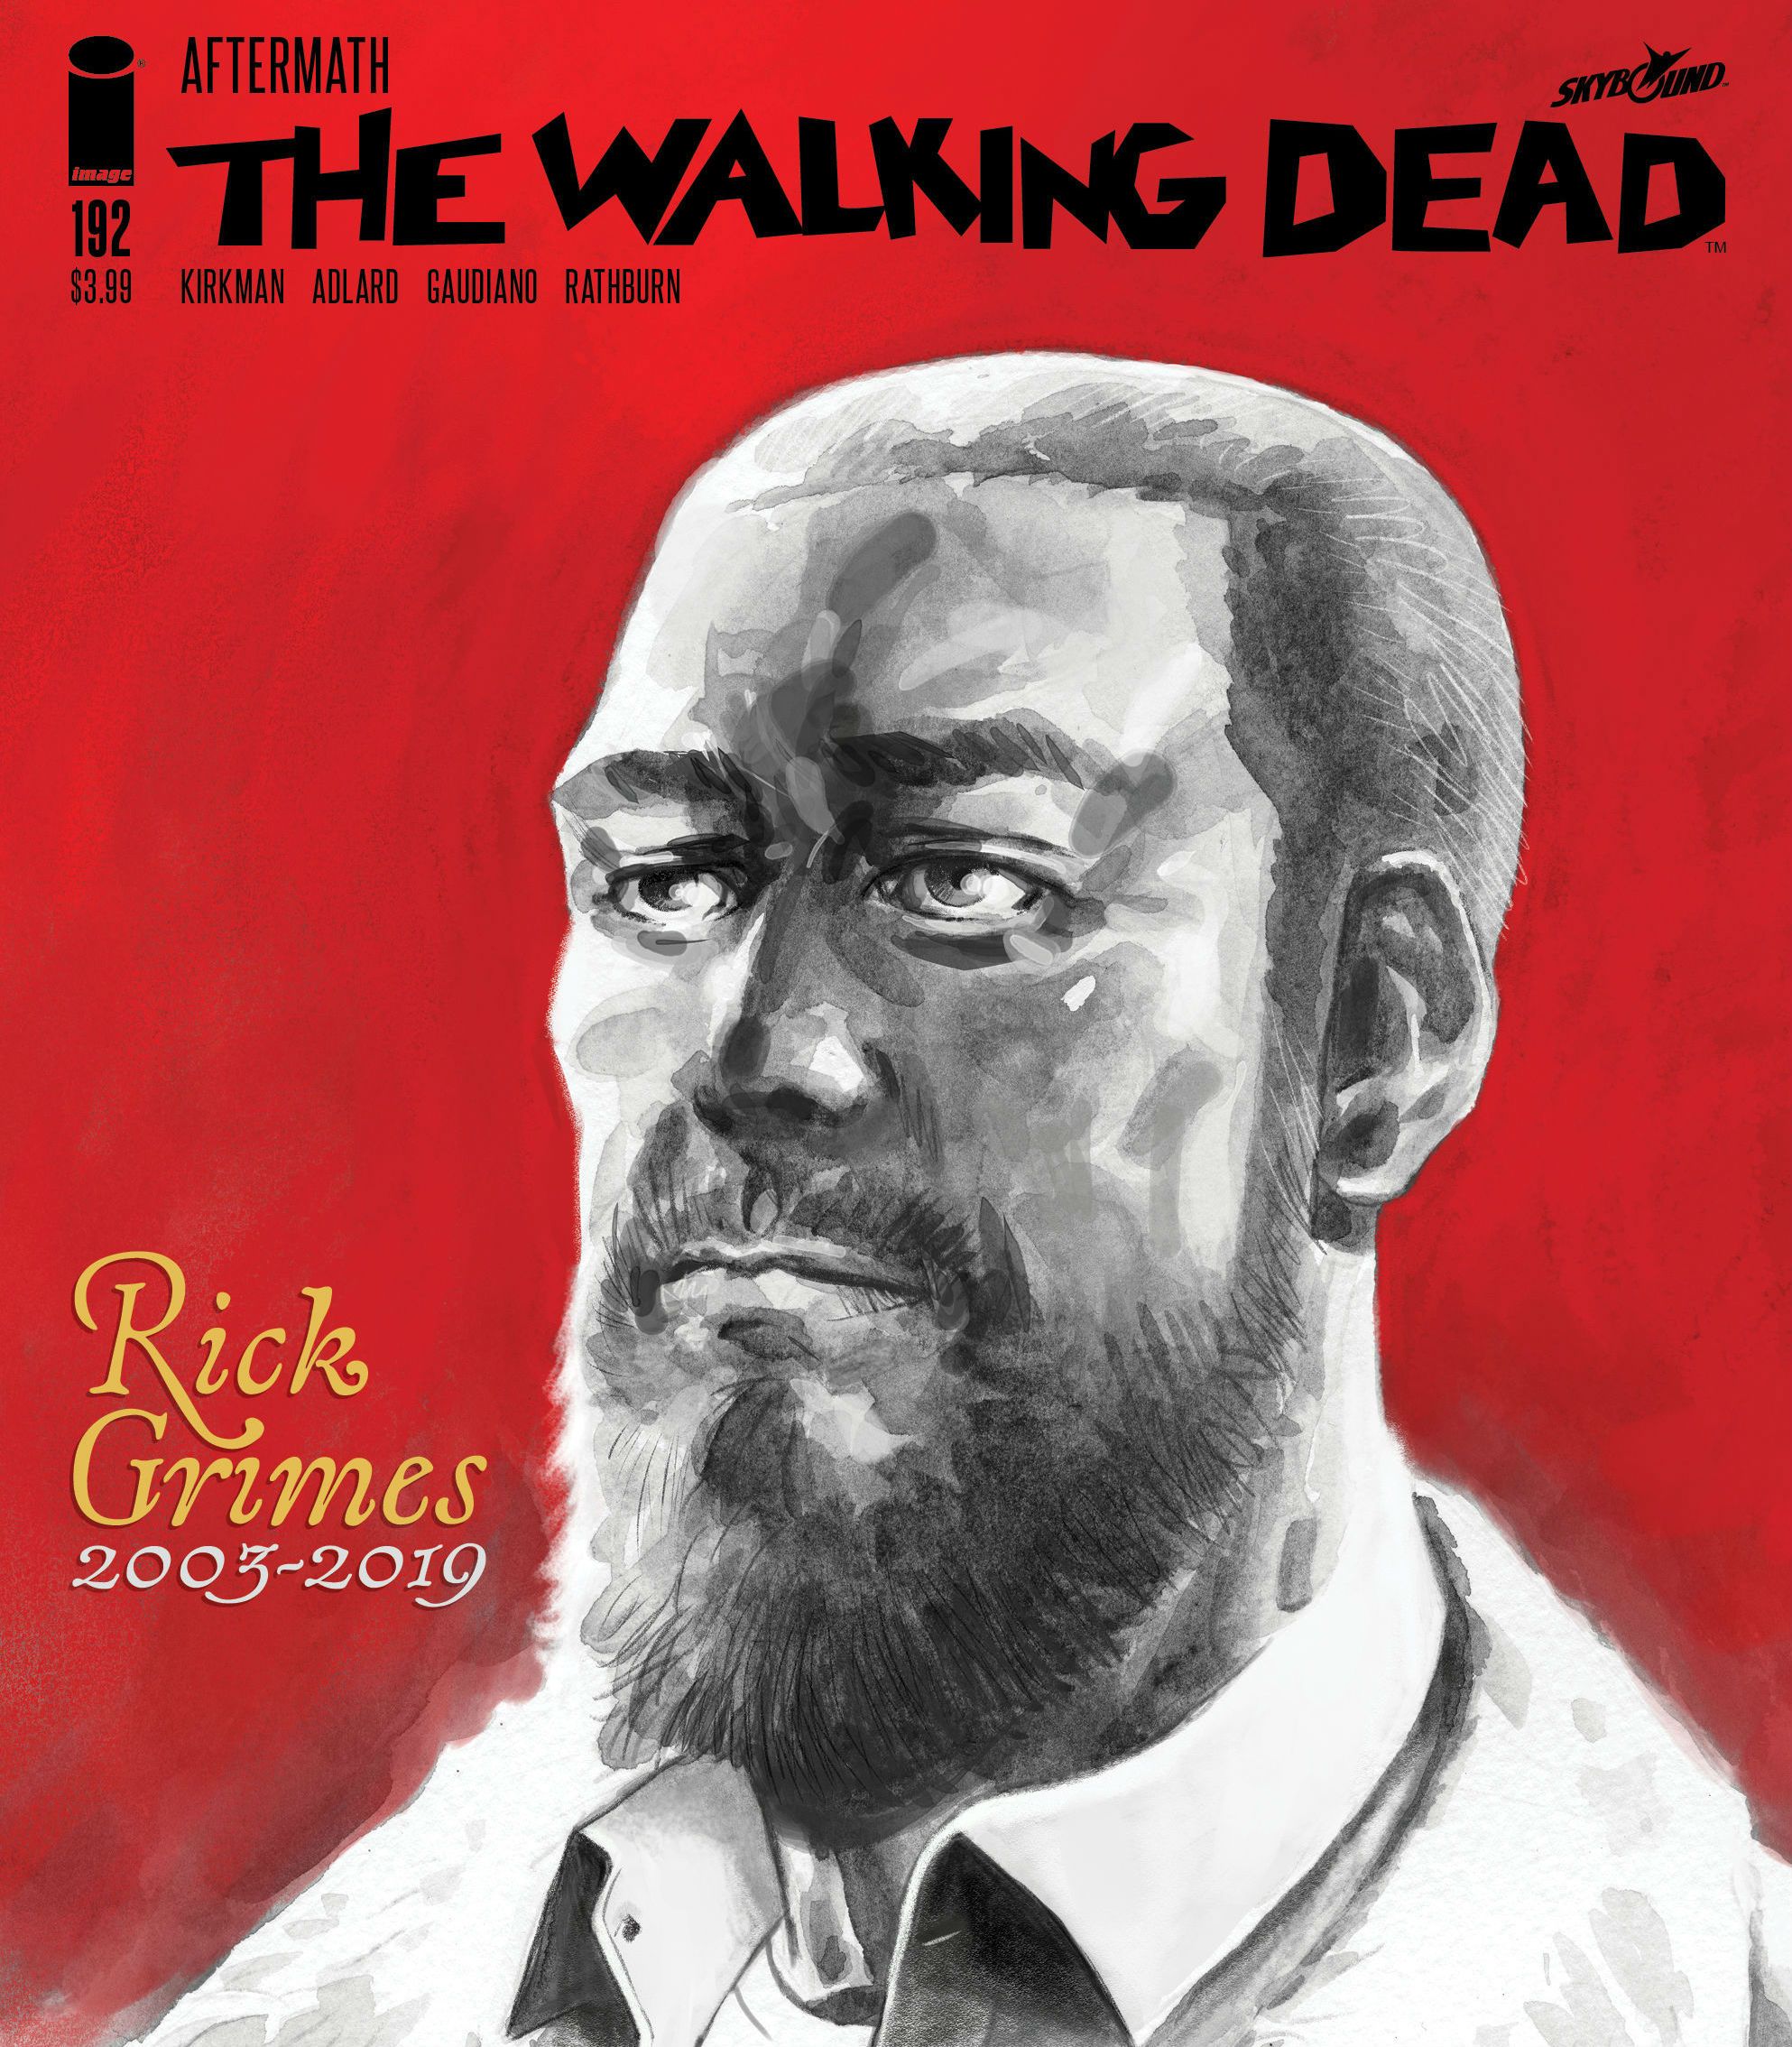 Rick Grimes memorial cover for The Walking Dead